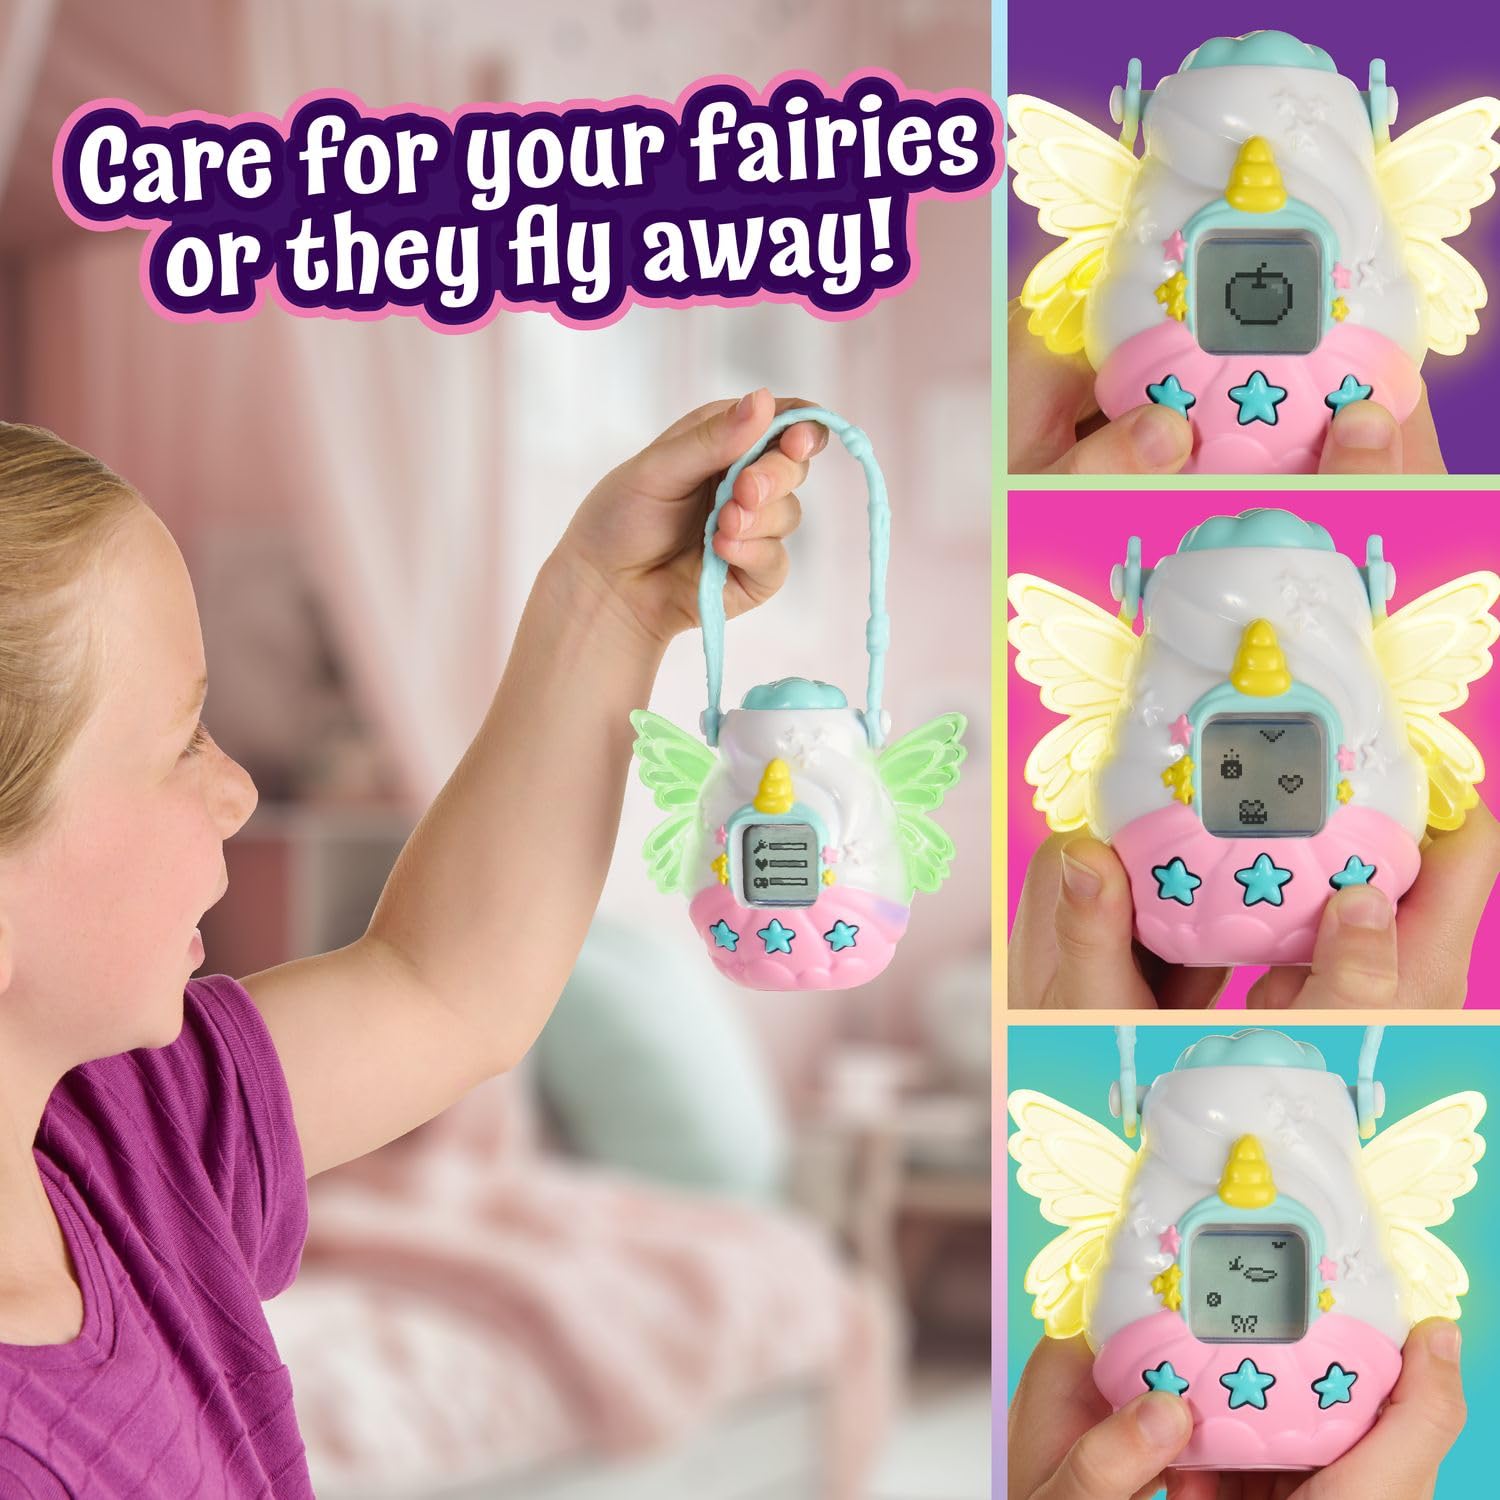 Got2Glow Fairy House – 9 Virtual Interactive Fairy Pets, Find, Care and Watch Them Grow (Ages 5+)